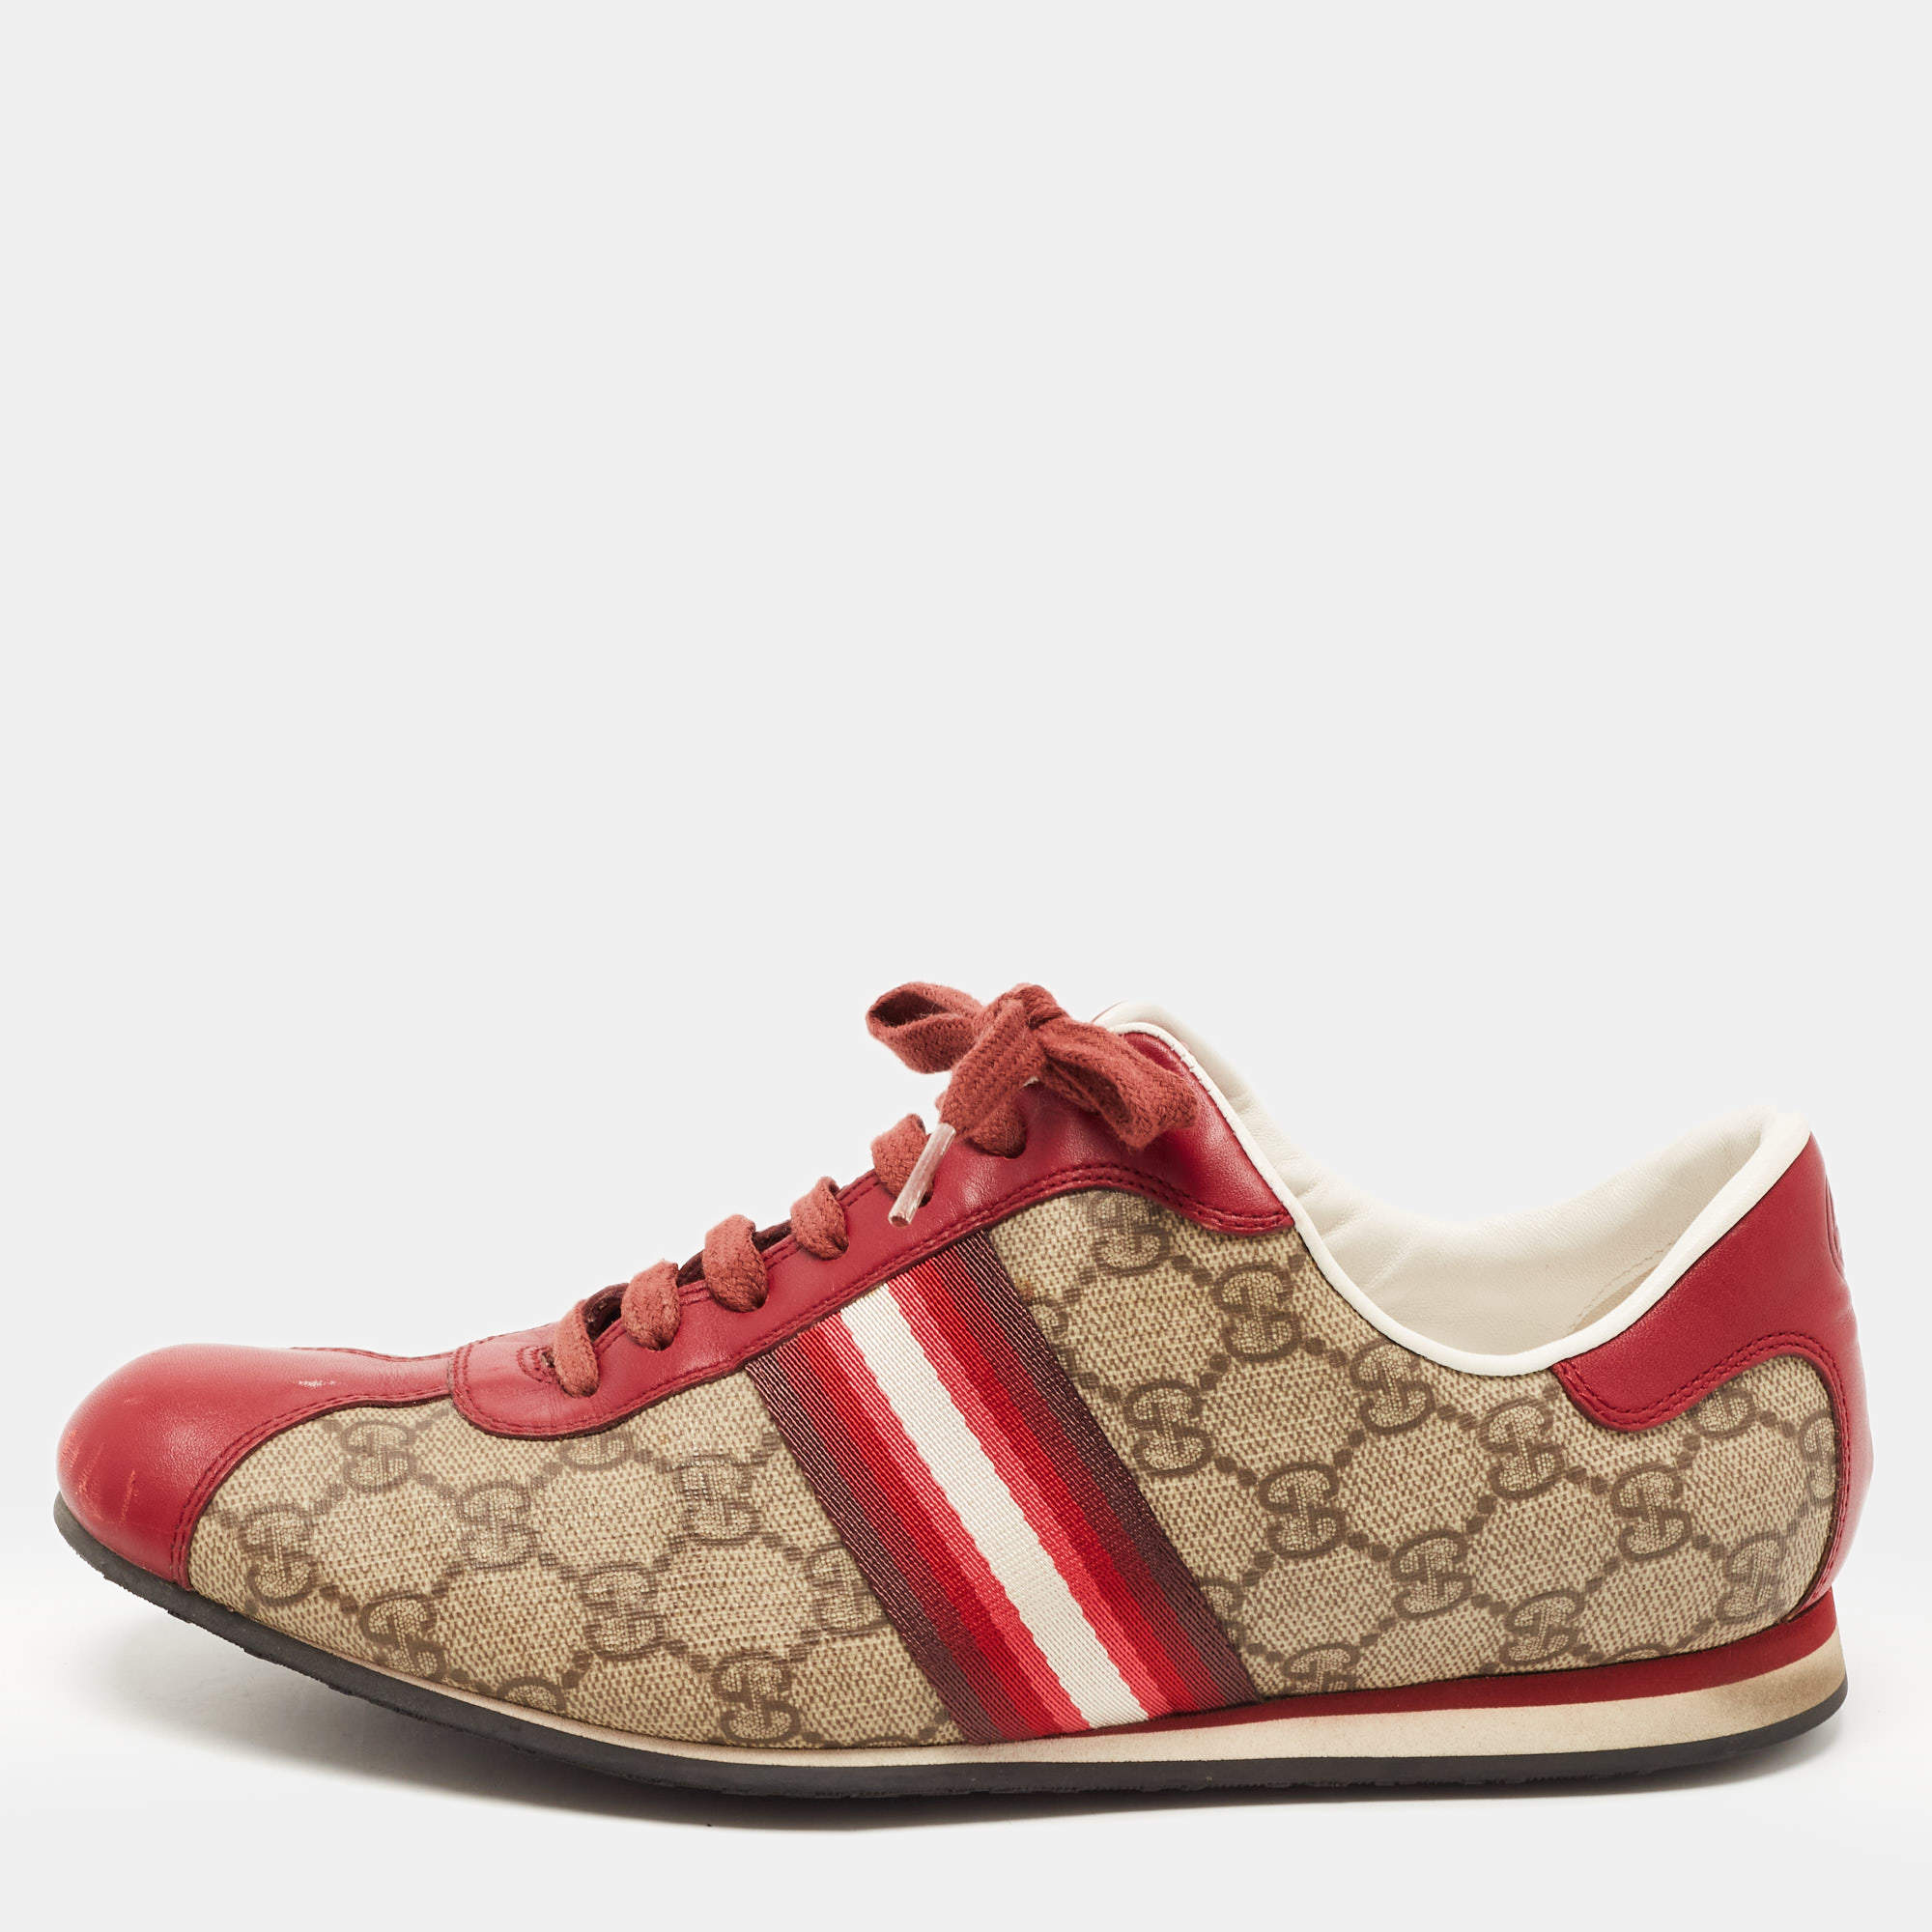 shoes, gucci mules, mules, red shoes, gucci, gucci shoes, skirt, mini  skirt, red skirt, top, animal print, jacket, army green jacket, bag,  crossbody bag, black bag, spring outfits, louis vuitton bag, louis